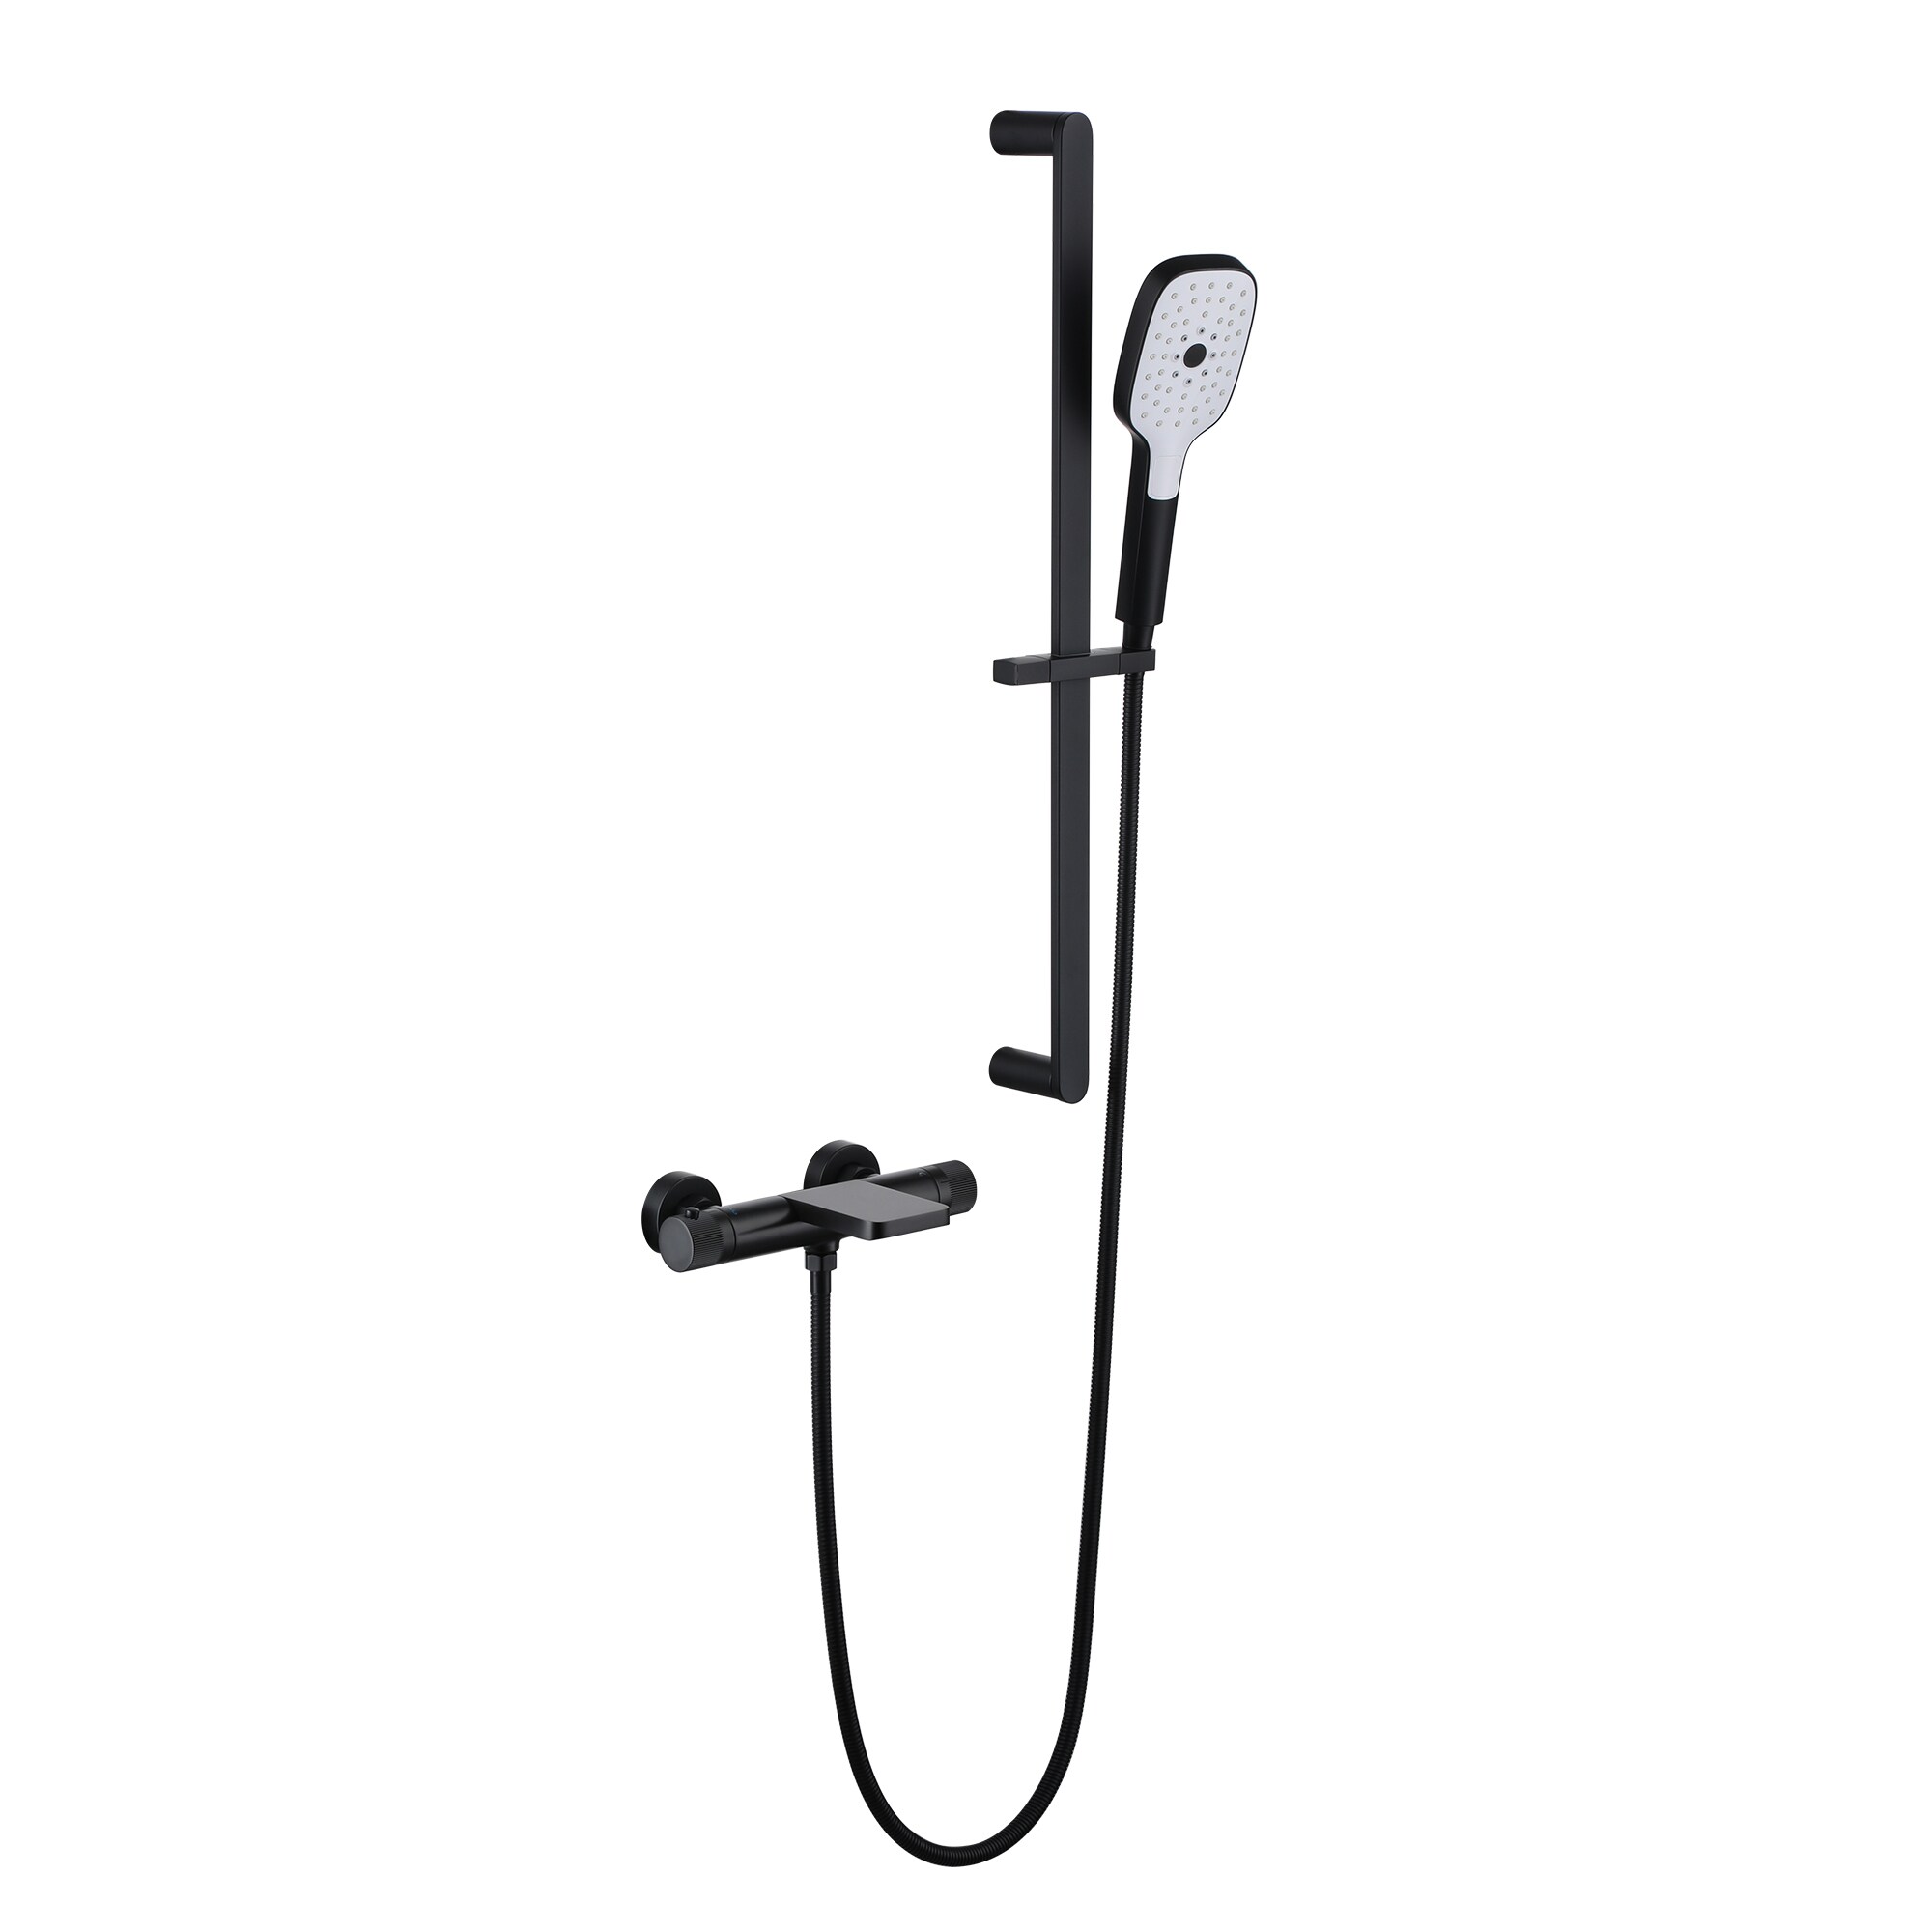 20 x 12 Modern Thermostatic Shower System with Handshower & Rack Solid Brass in Black